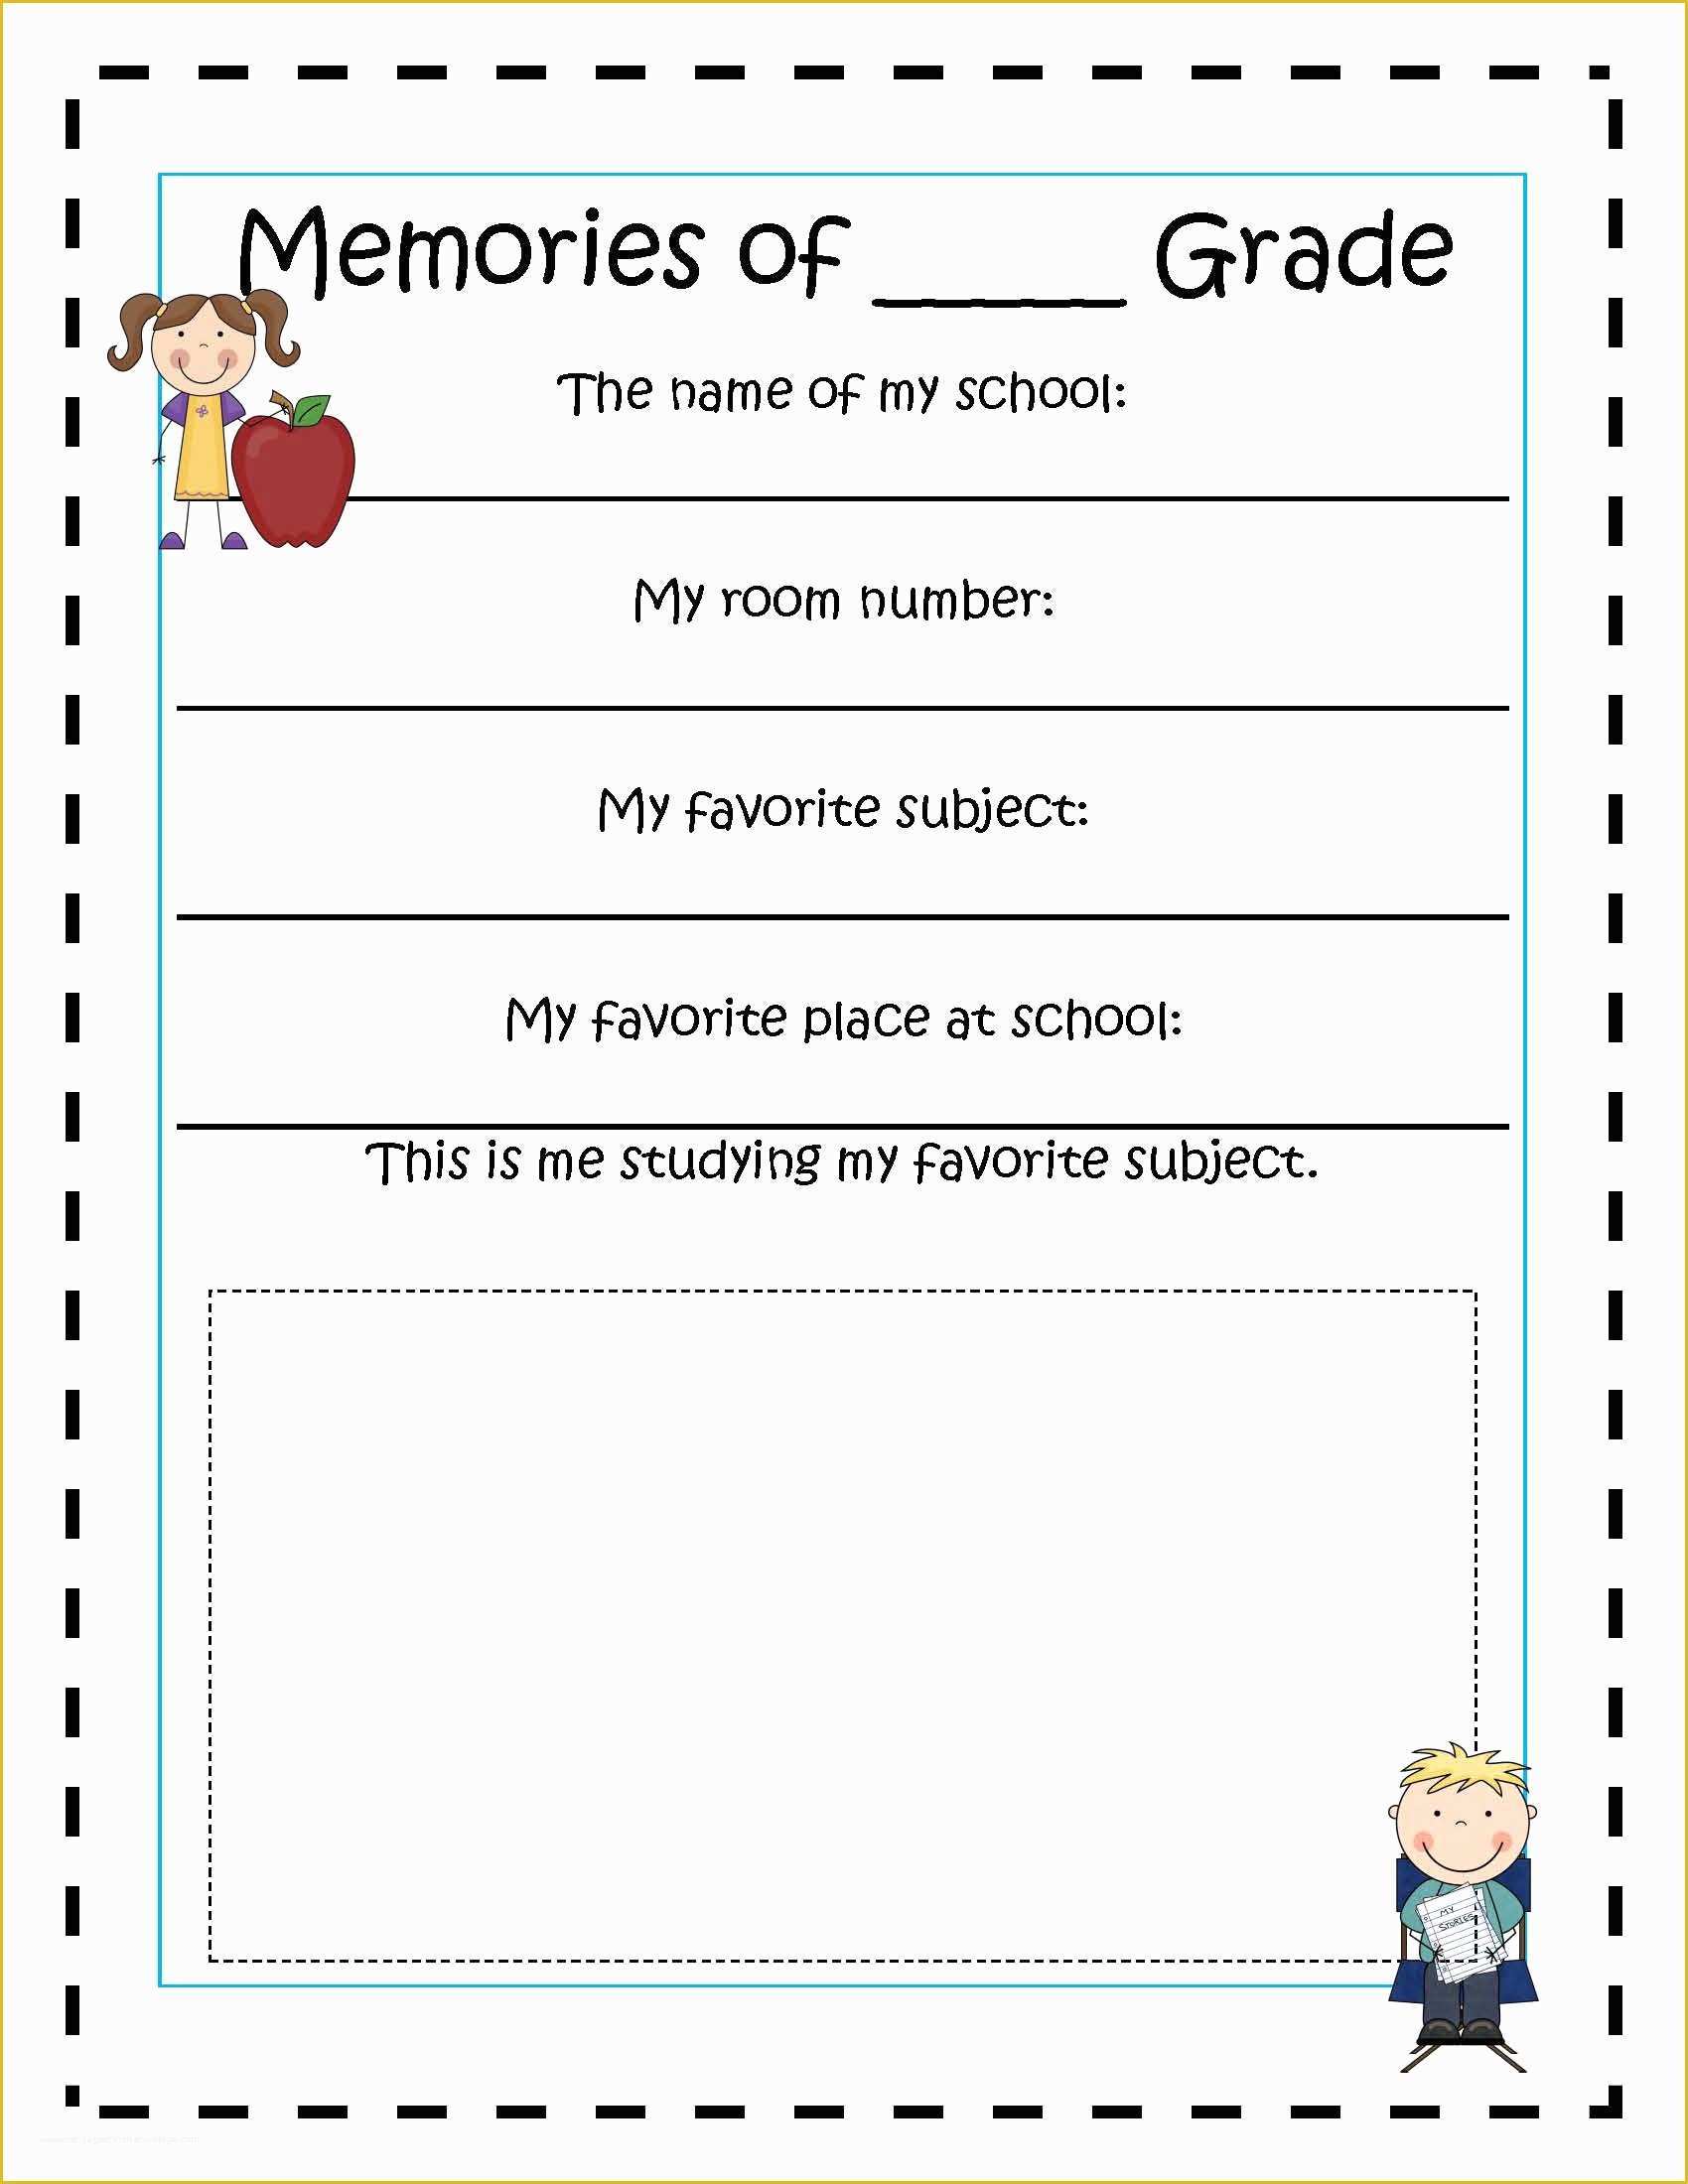 Free Printable Memory Book Templates Of 7 Best Of Memory Book Printables for Adults